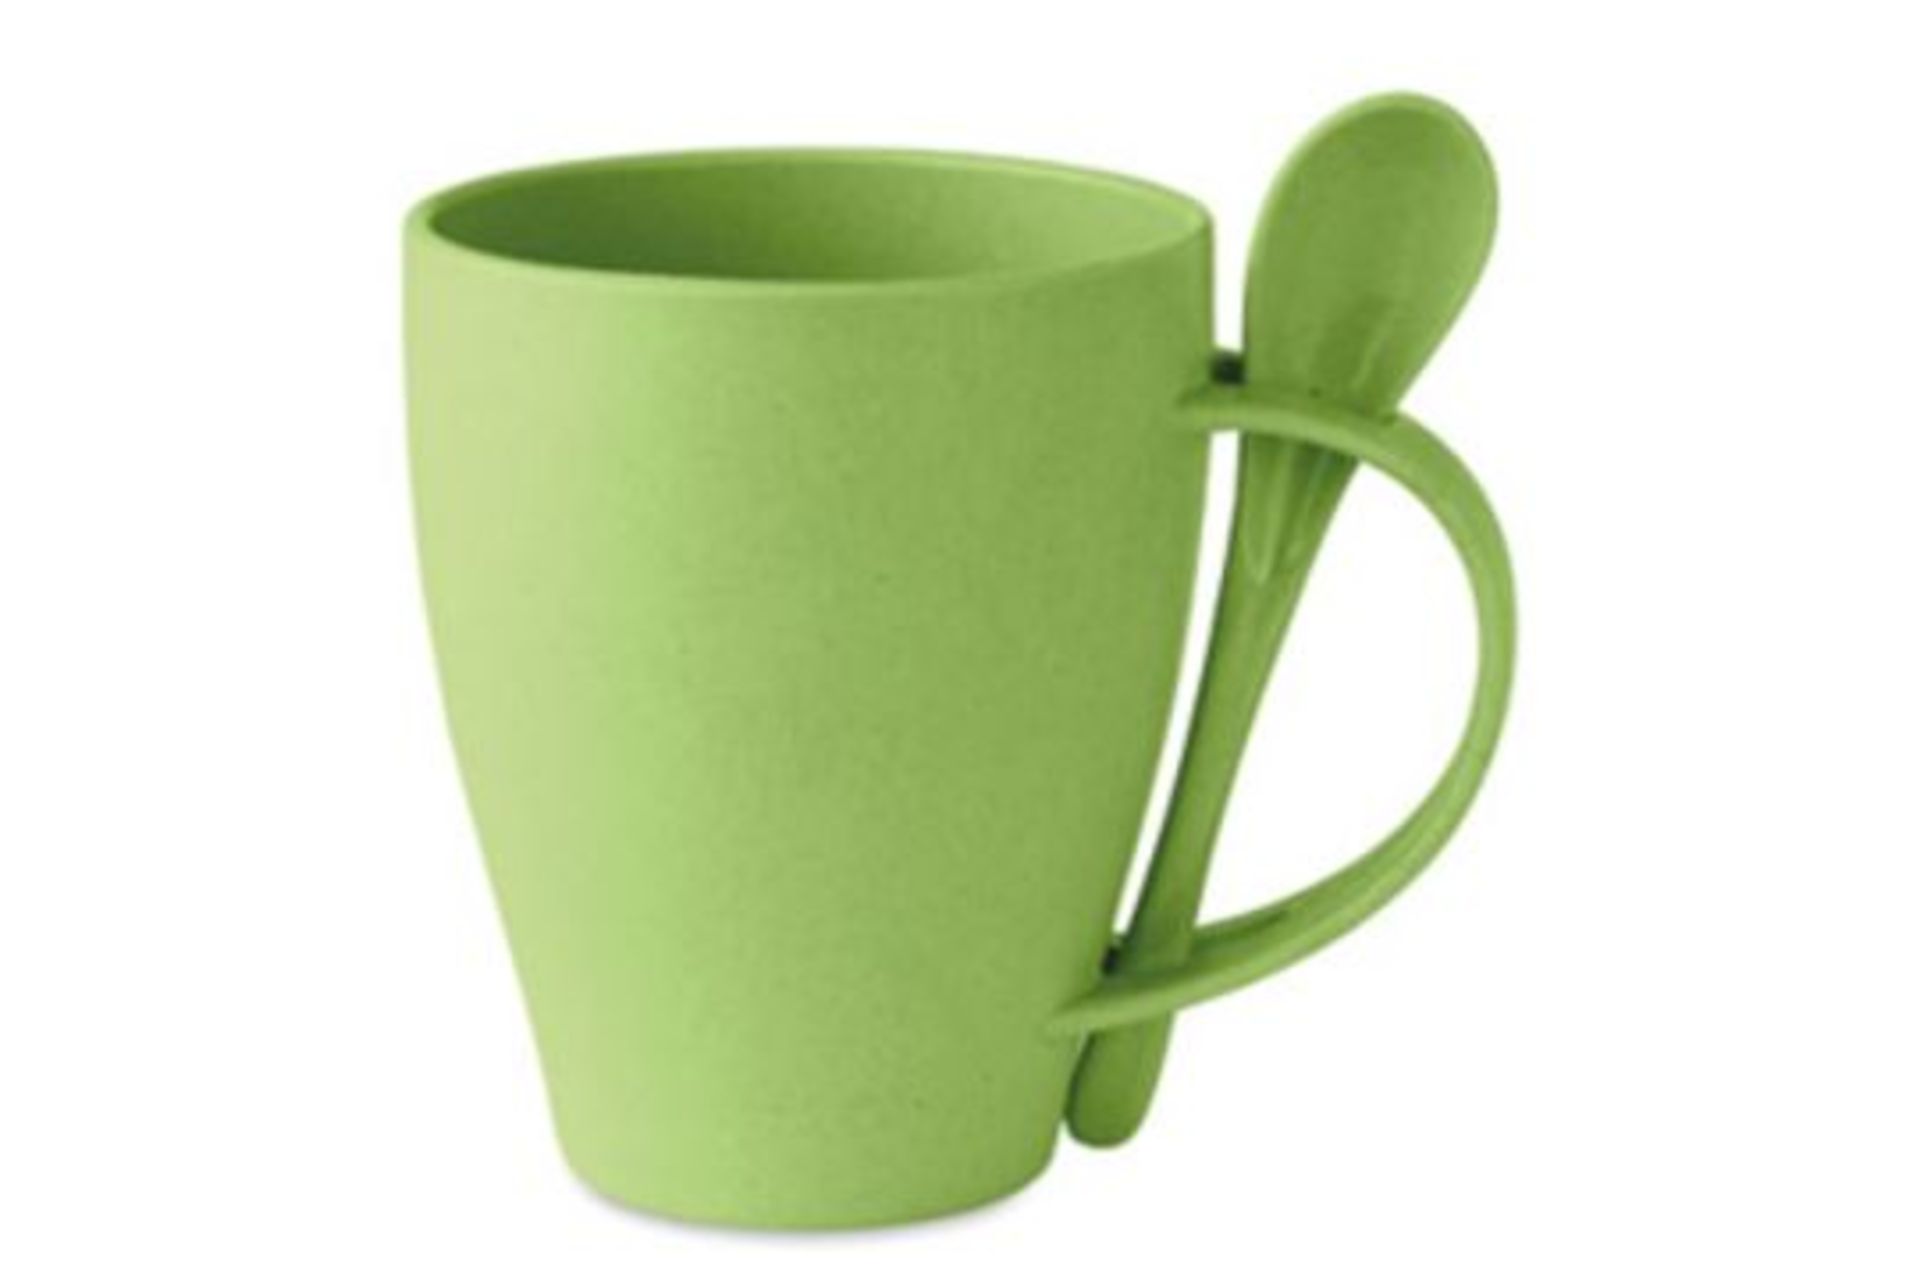 x2 New Green Bamboo Mugs With Spoons